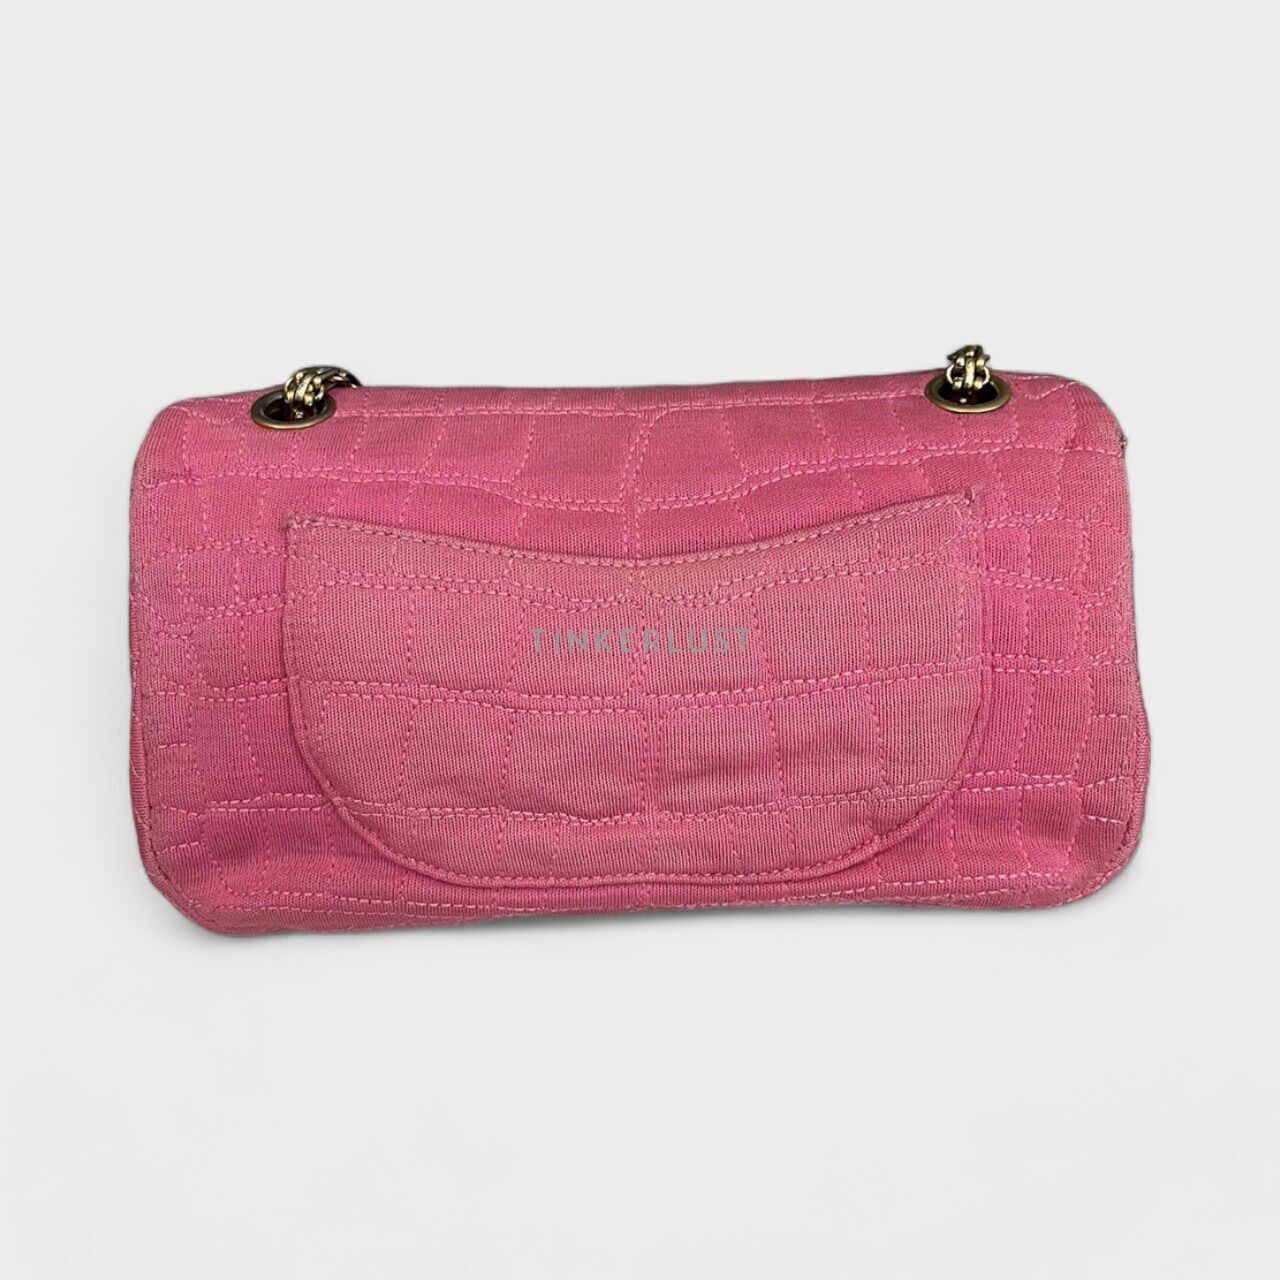 Chanel Reissue Small Pink Jersey Croco #11 GHW Shoulder Bag